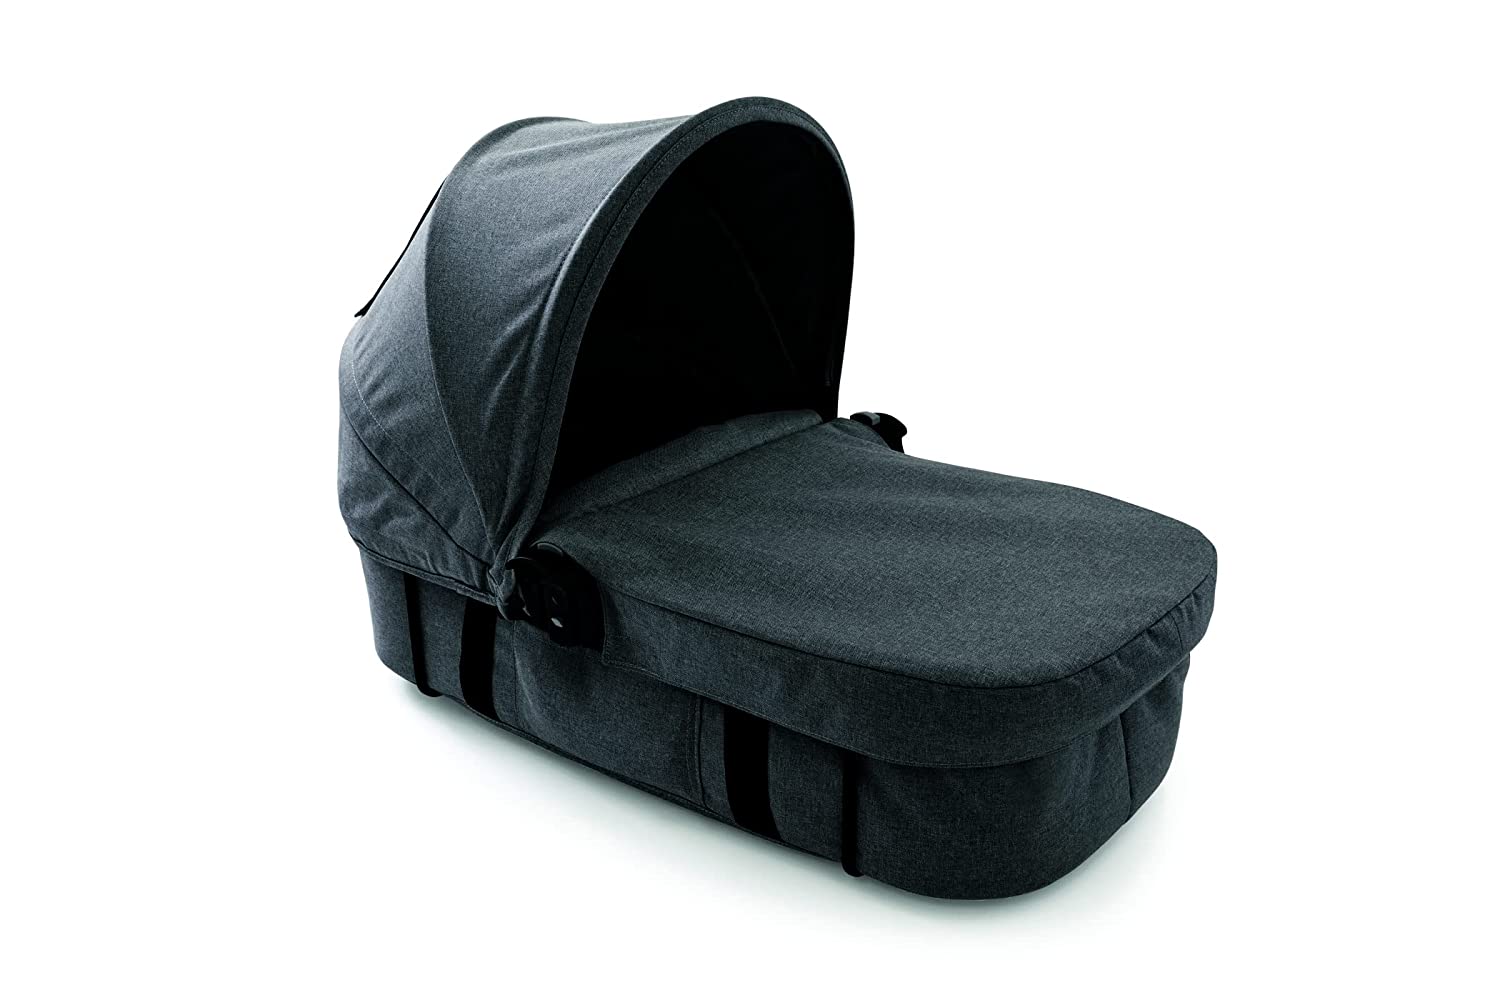 Baby Jogger City Select Carrycot Kit, Granite